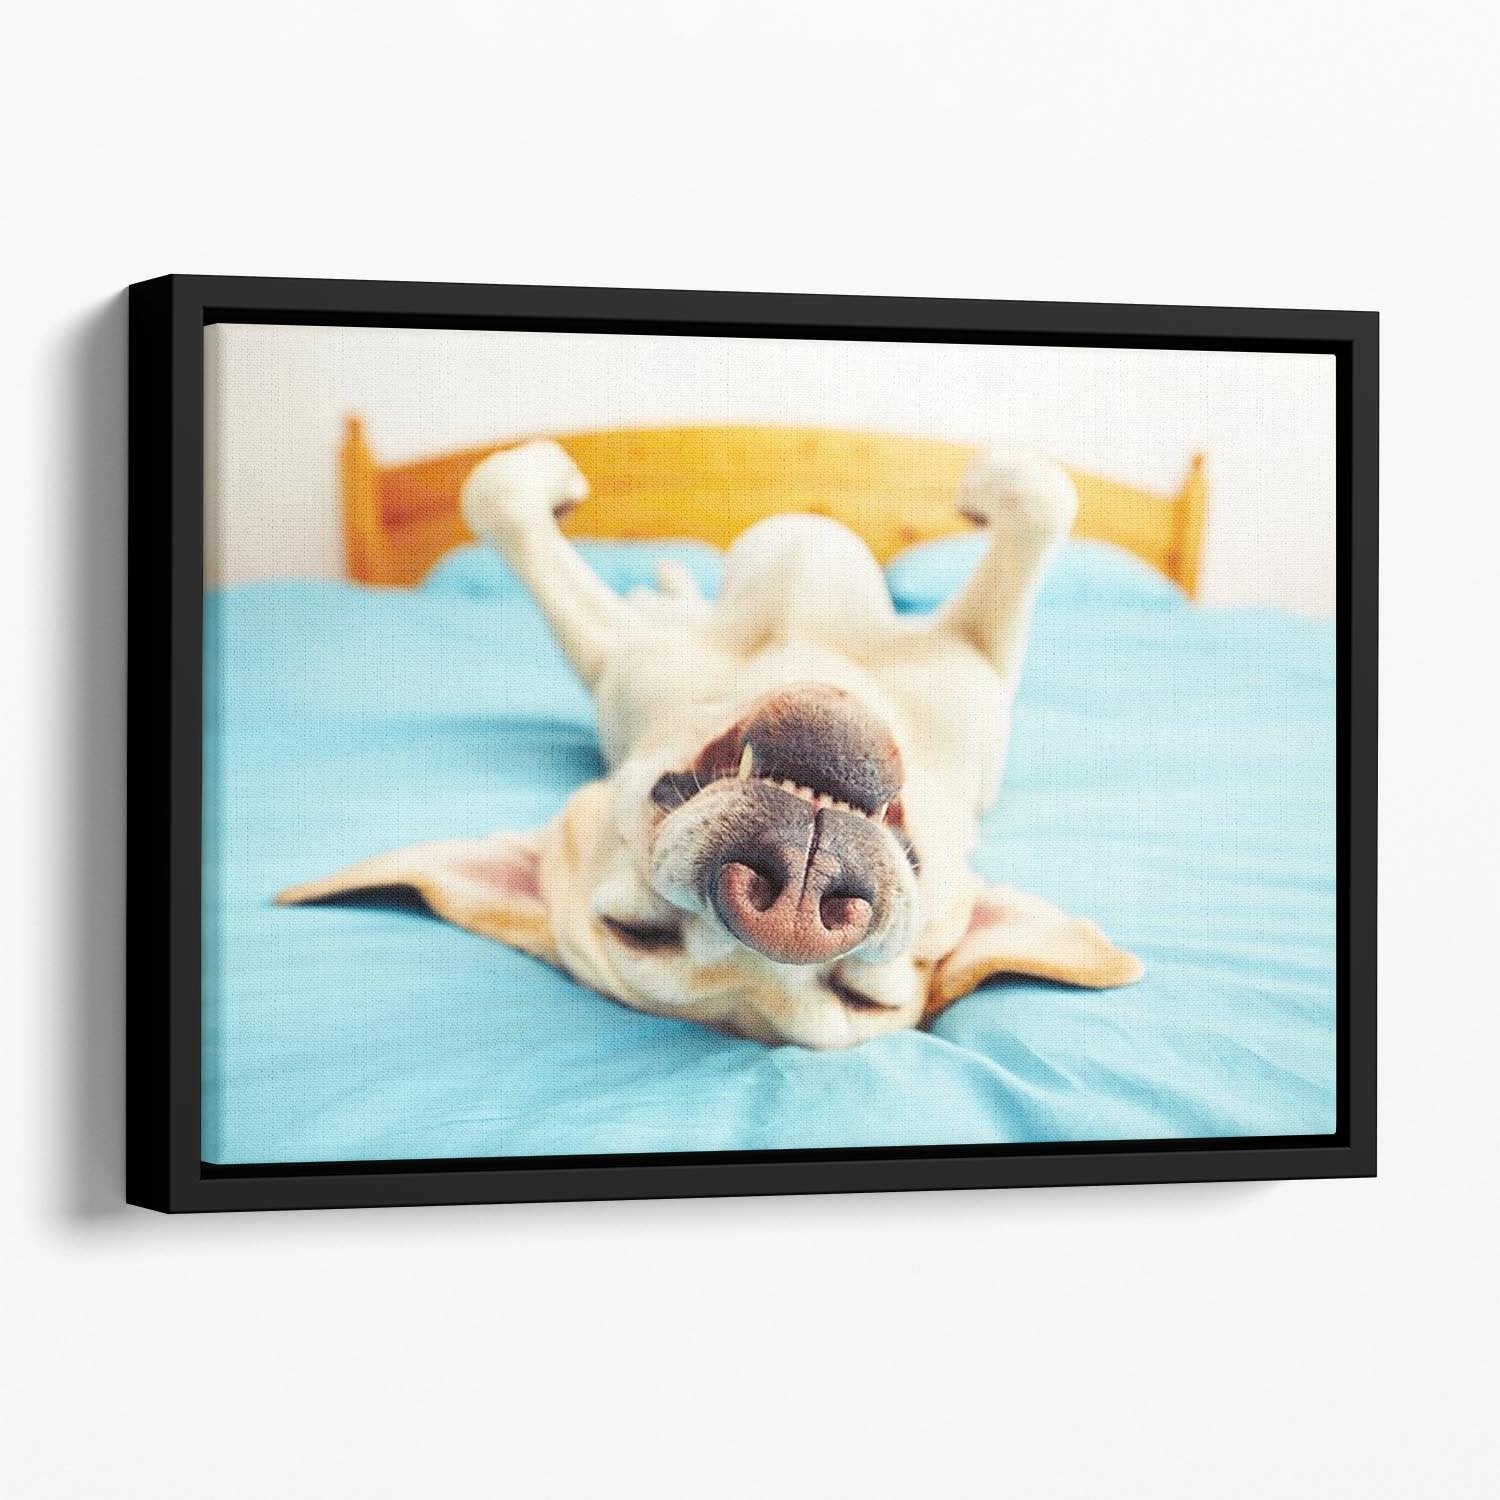 Dog is lying on back on the bed Floating Framed Canvas - Canvas Art Rocks - 1